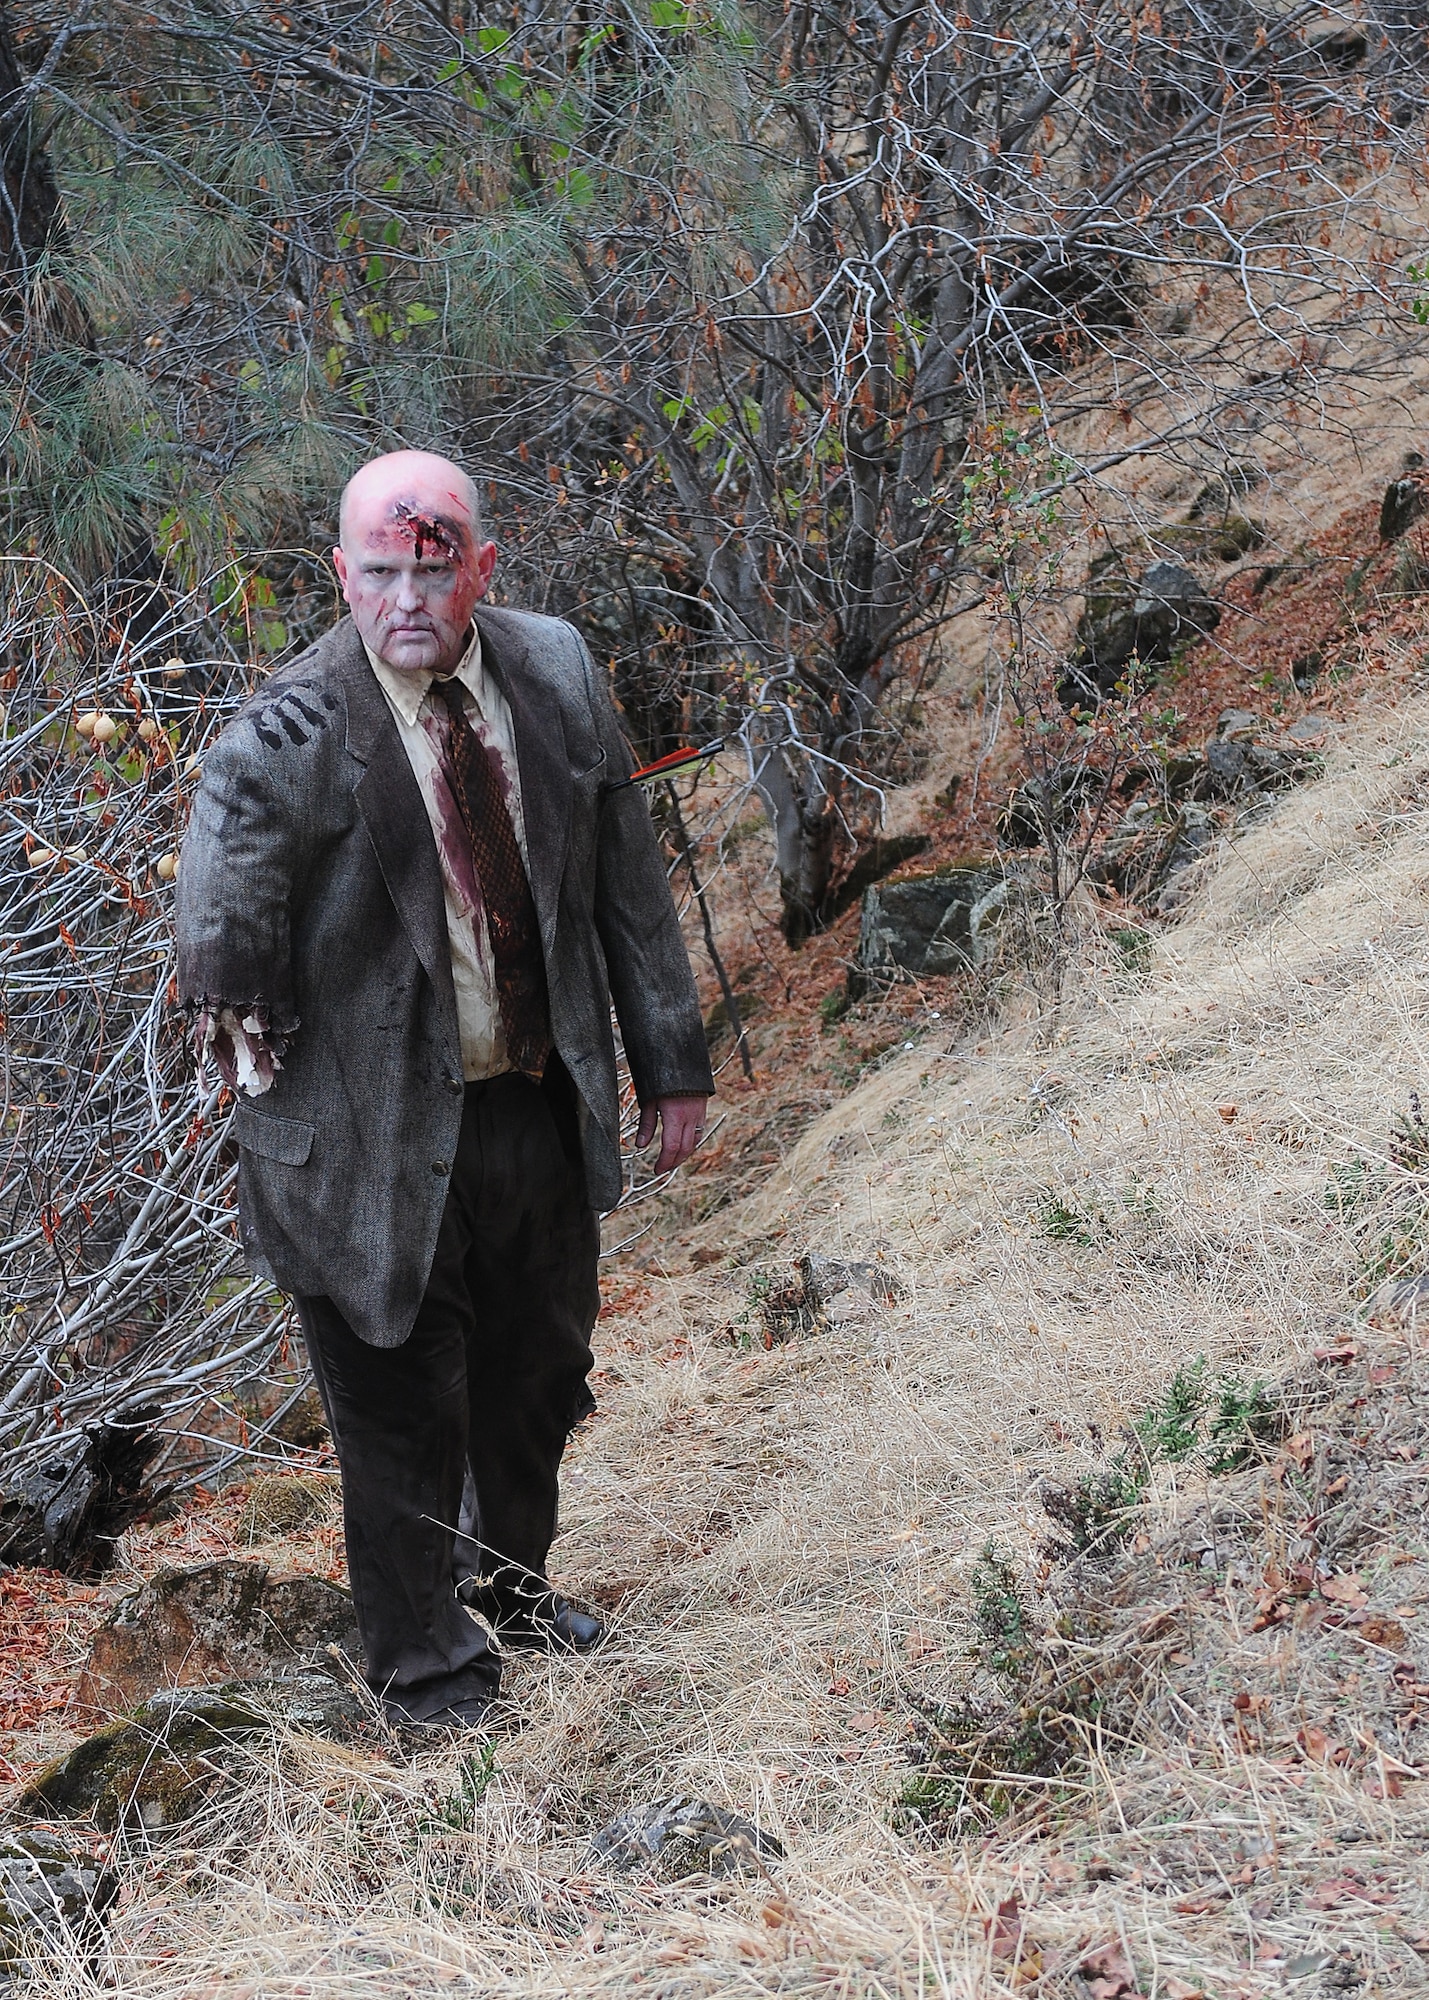 A Team Beale zombie wanders through the woods awaiting runners during the 2nd annual Zombie Run at Beale Air Force Base Calif., Oct. 31, 2012. The one-armed zombie also won 1st place for the best zombie costume during the event. (U.S. Air Force photo by Senior Airman Allen Pollard/Released)